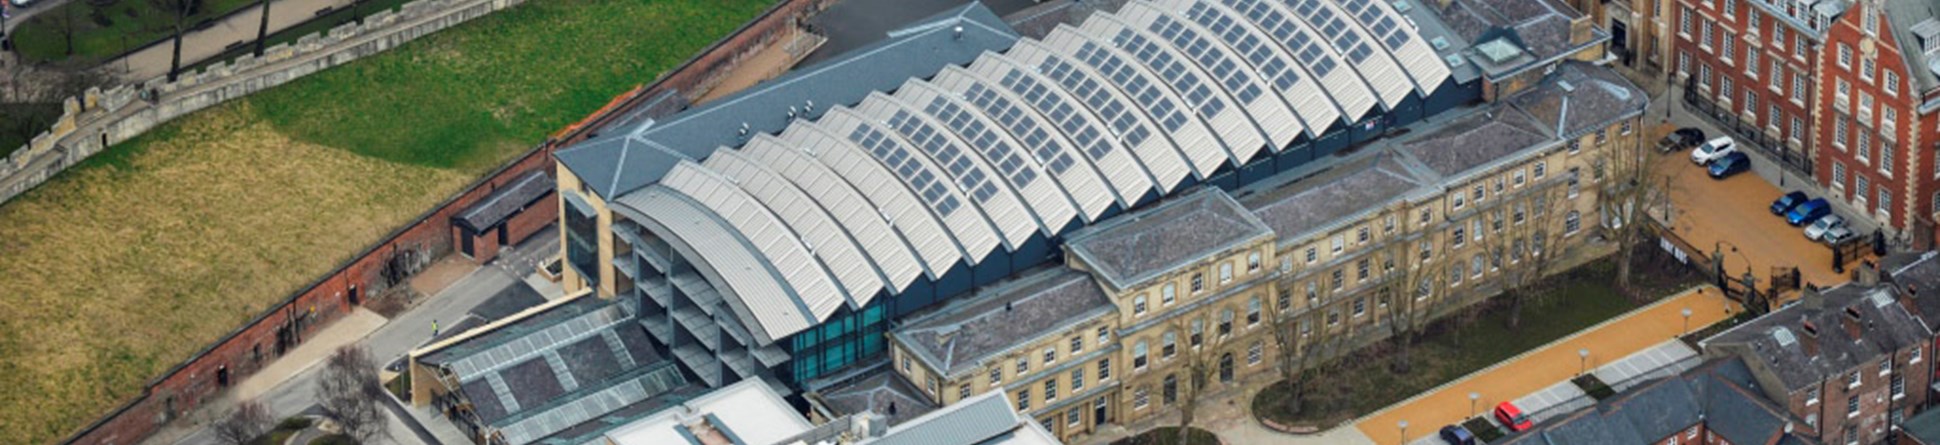 Aerial photo of former railway station converted into offices